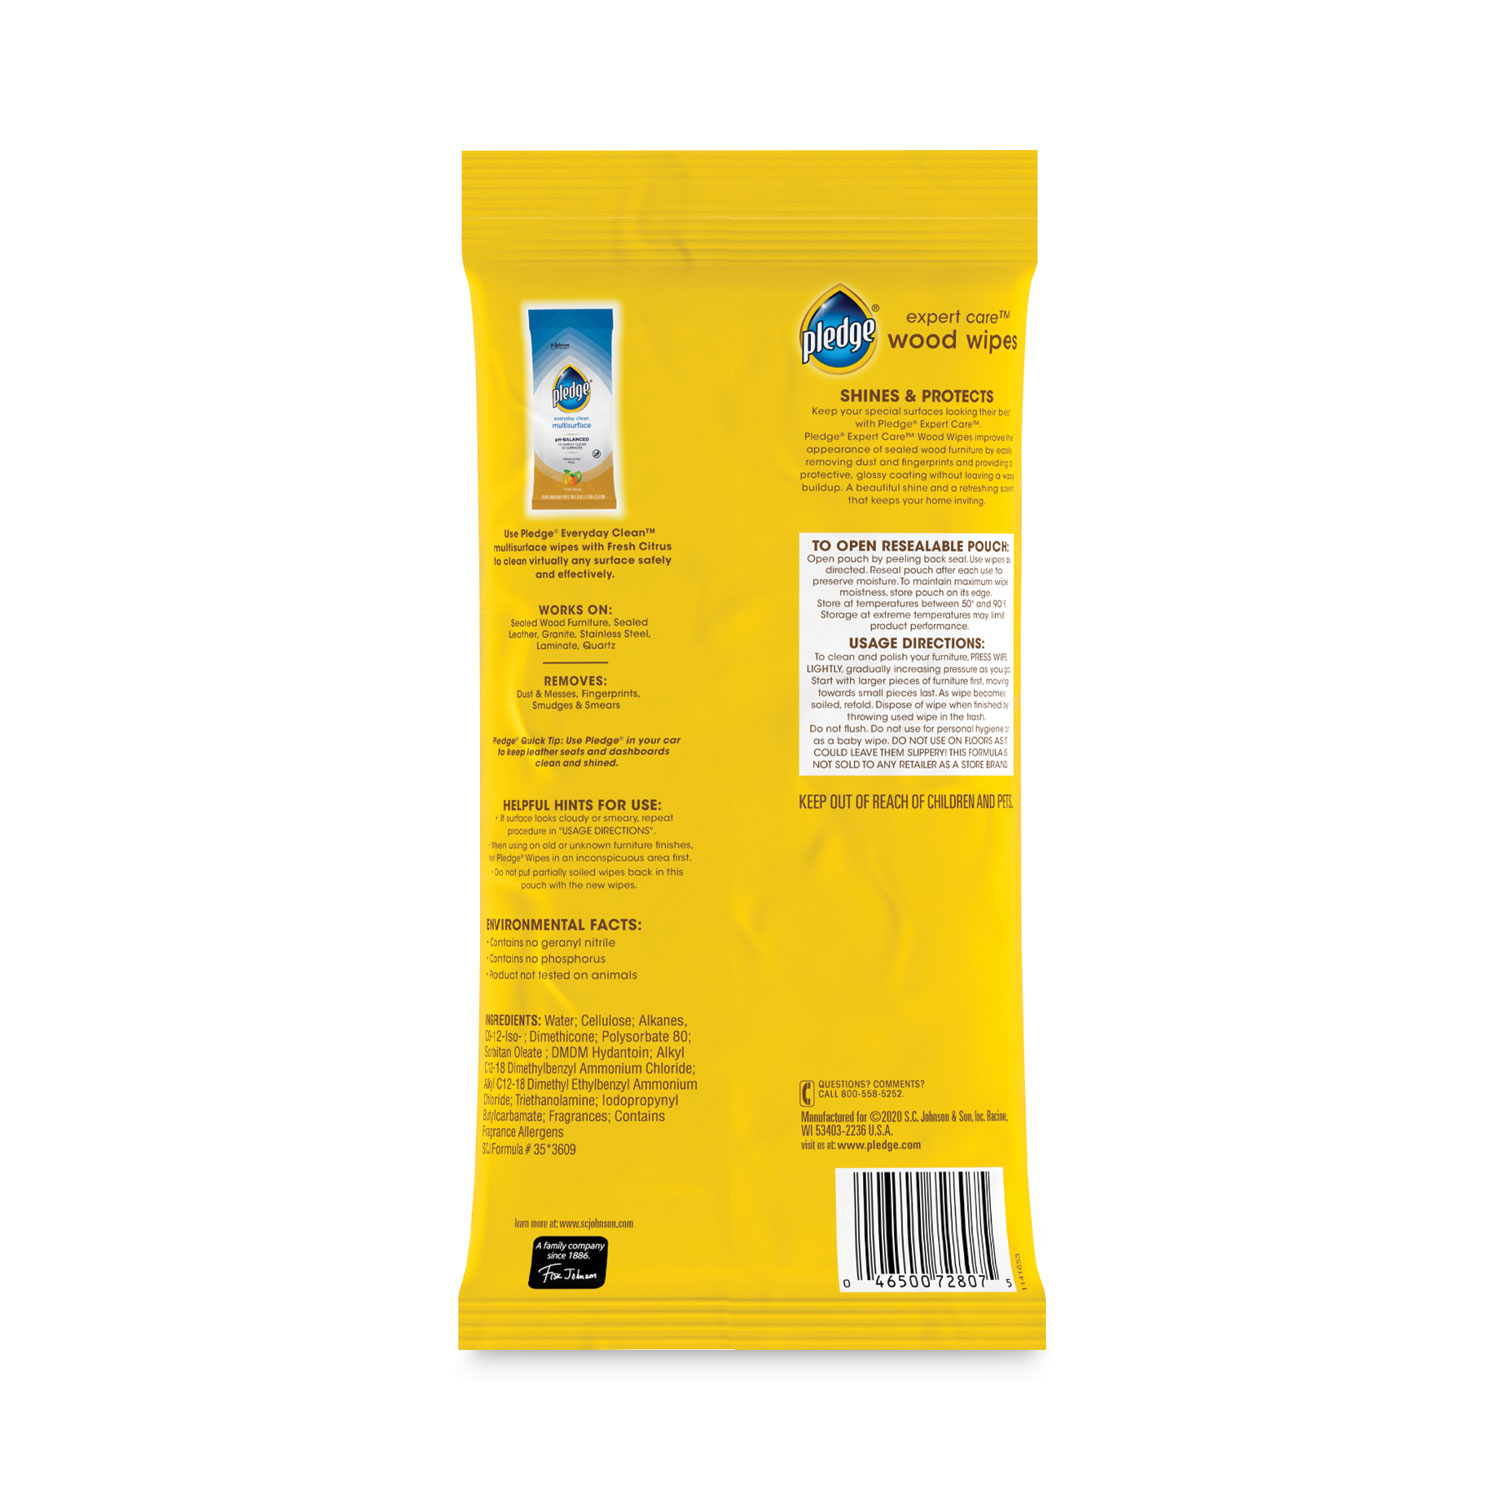 Pledge 72807 Lemon Scented Wipes 24 Count (Pack Of 12)